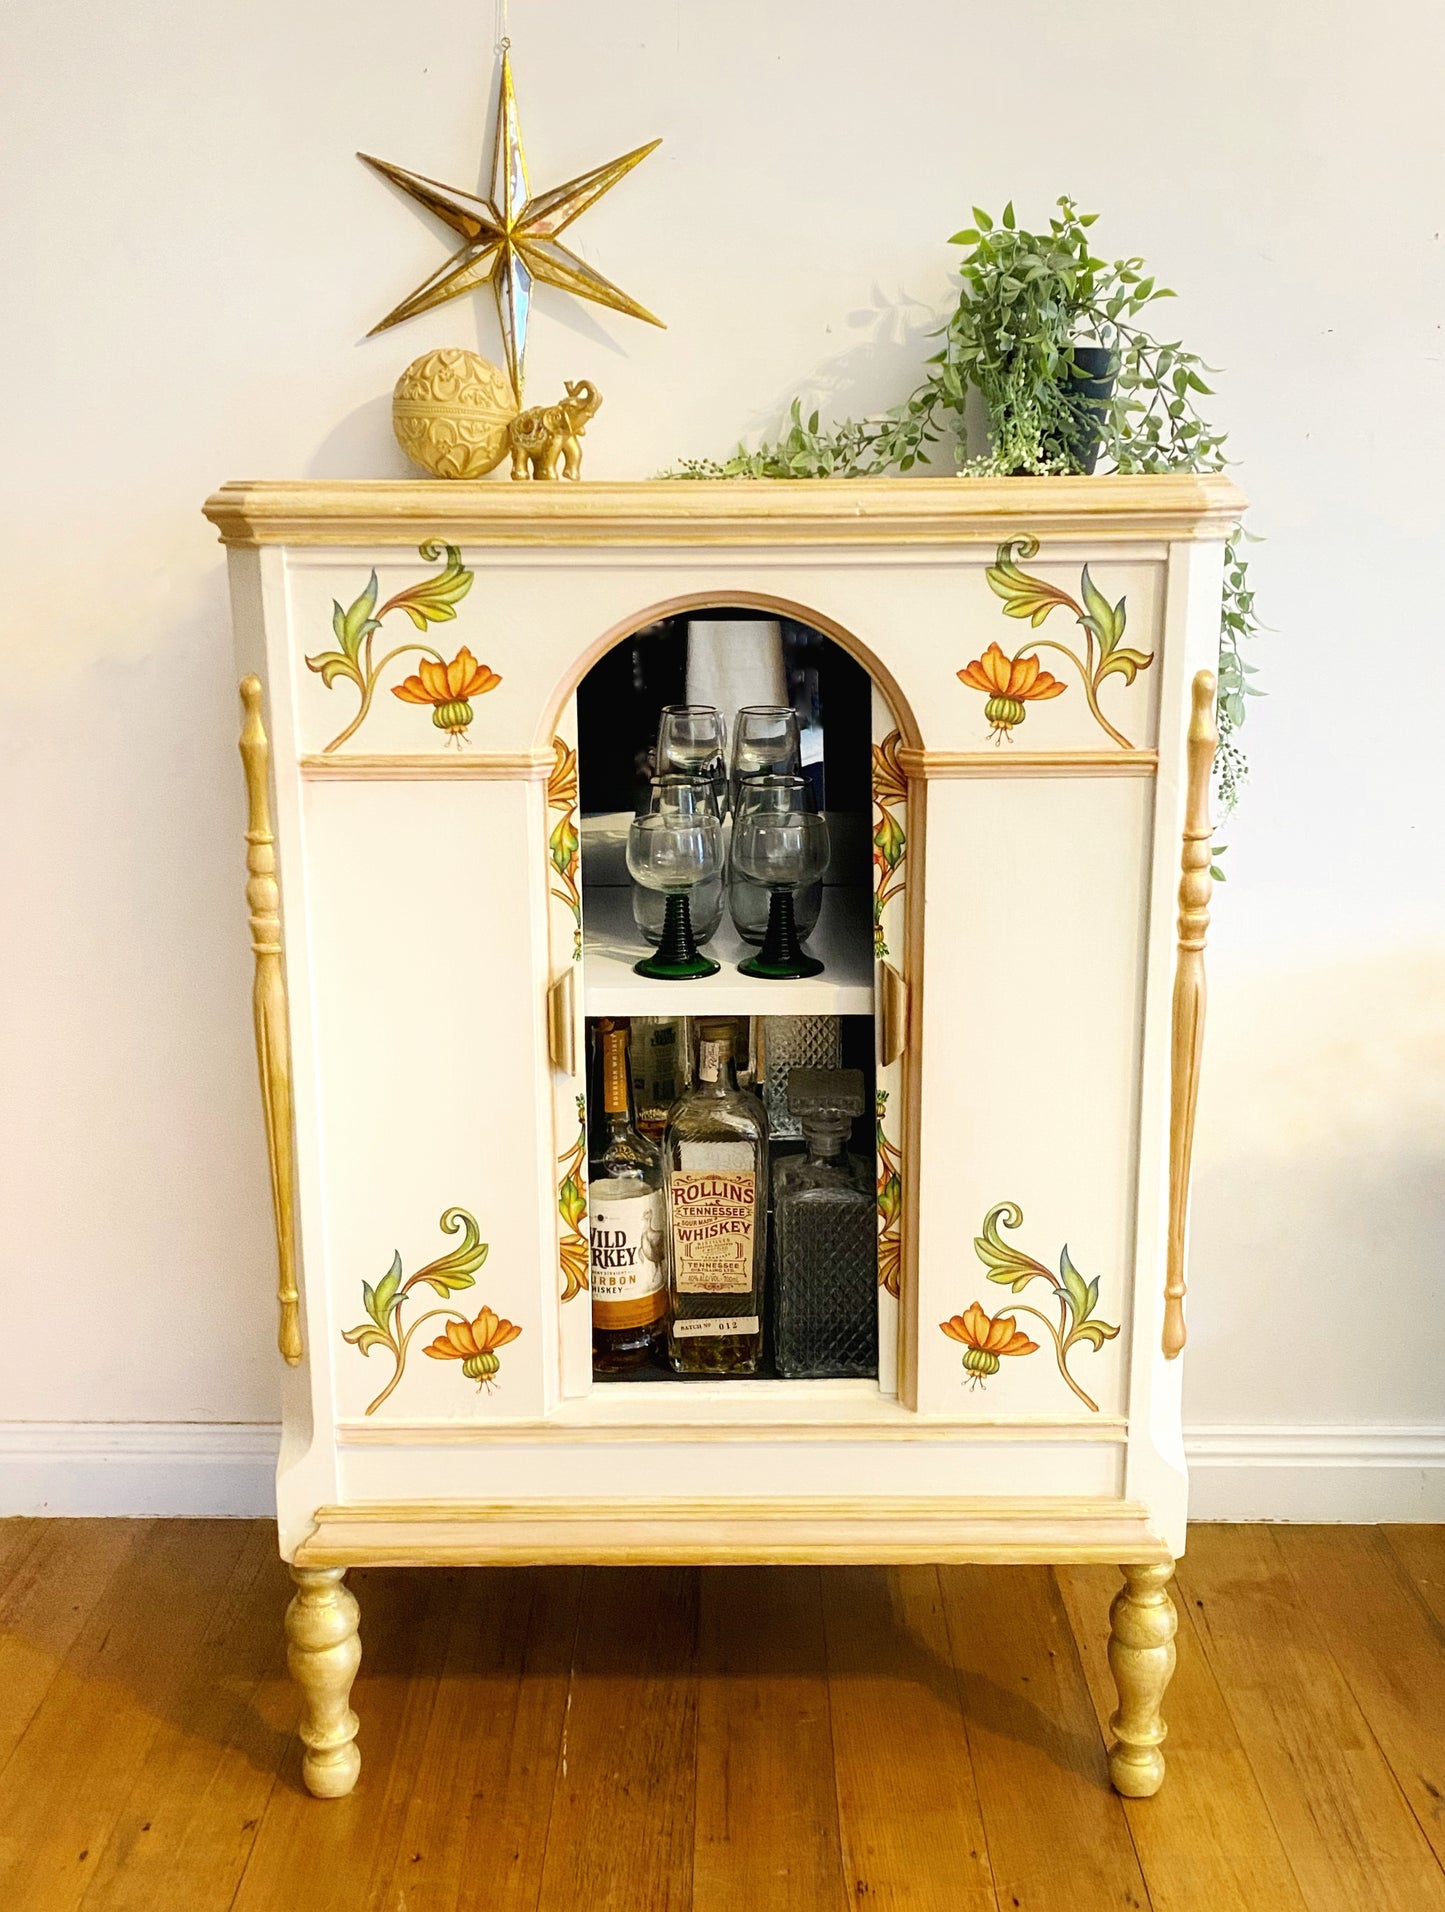 Drinks cabinet or jewellery armoire